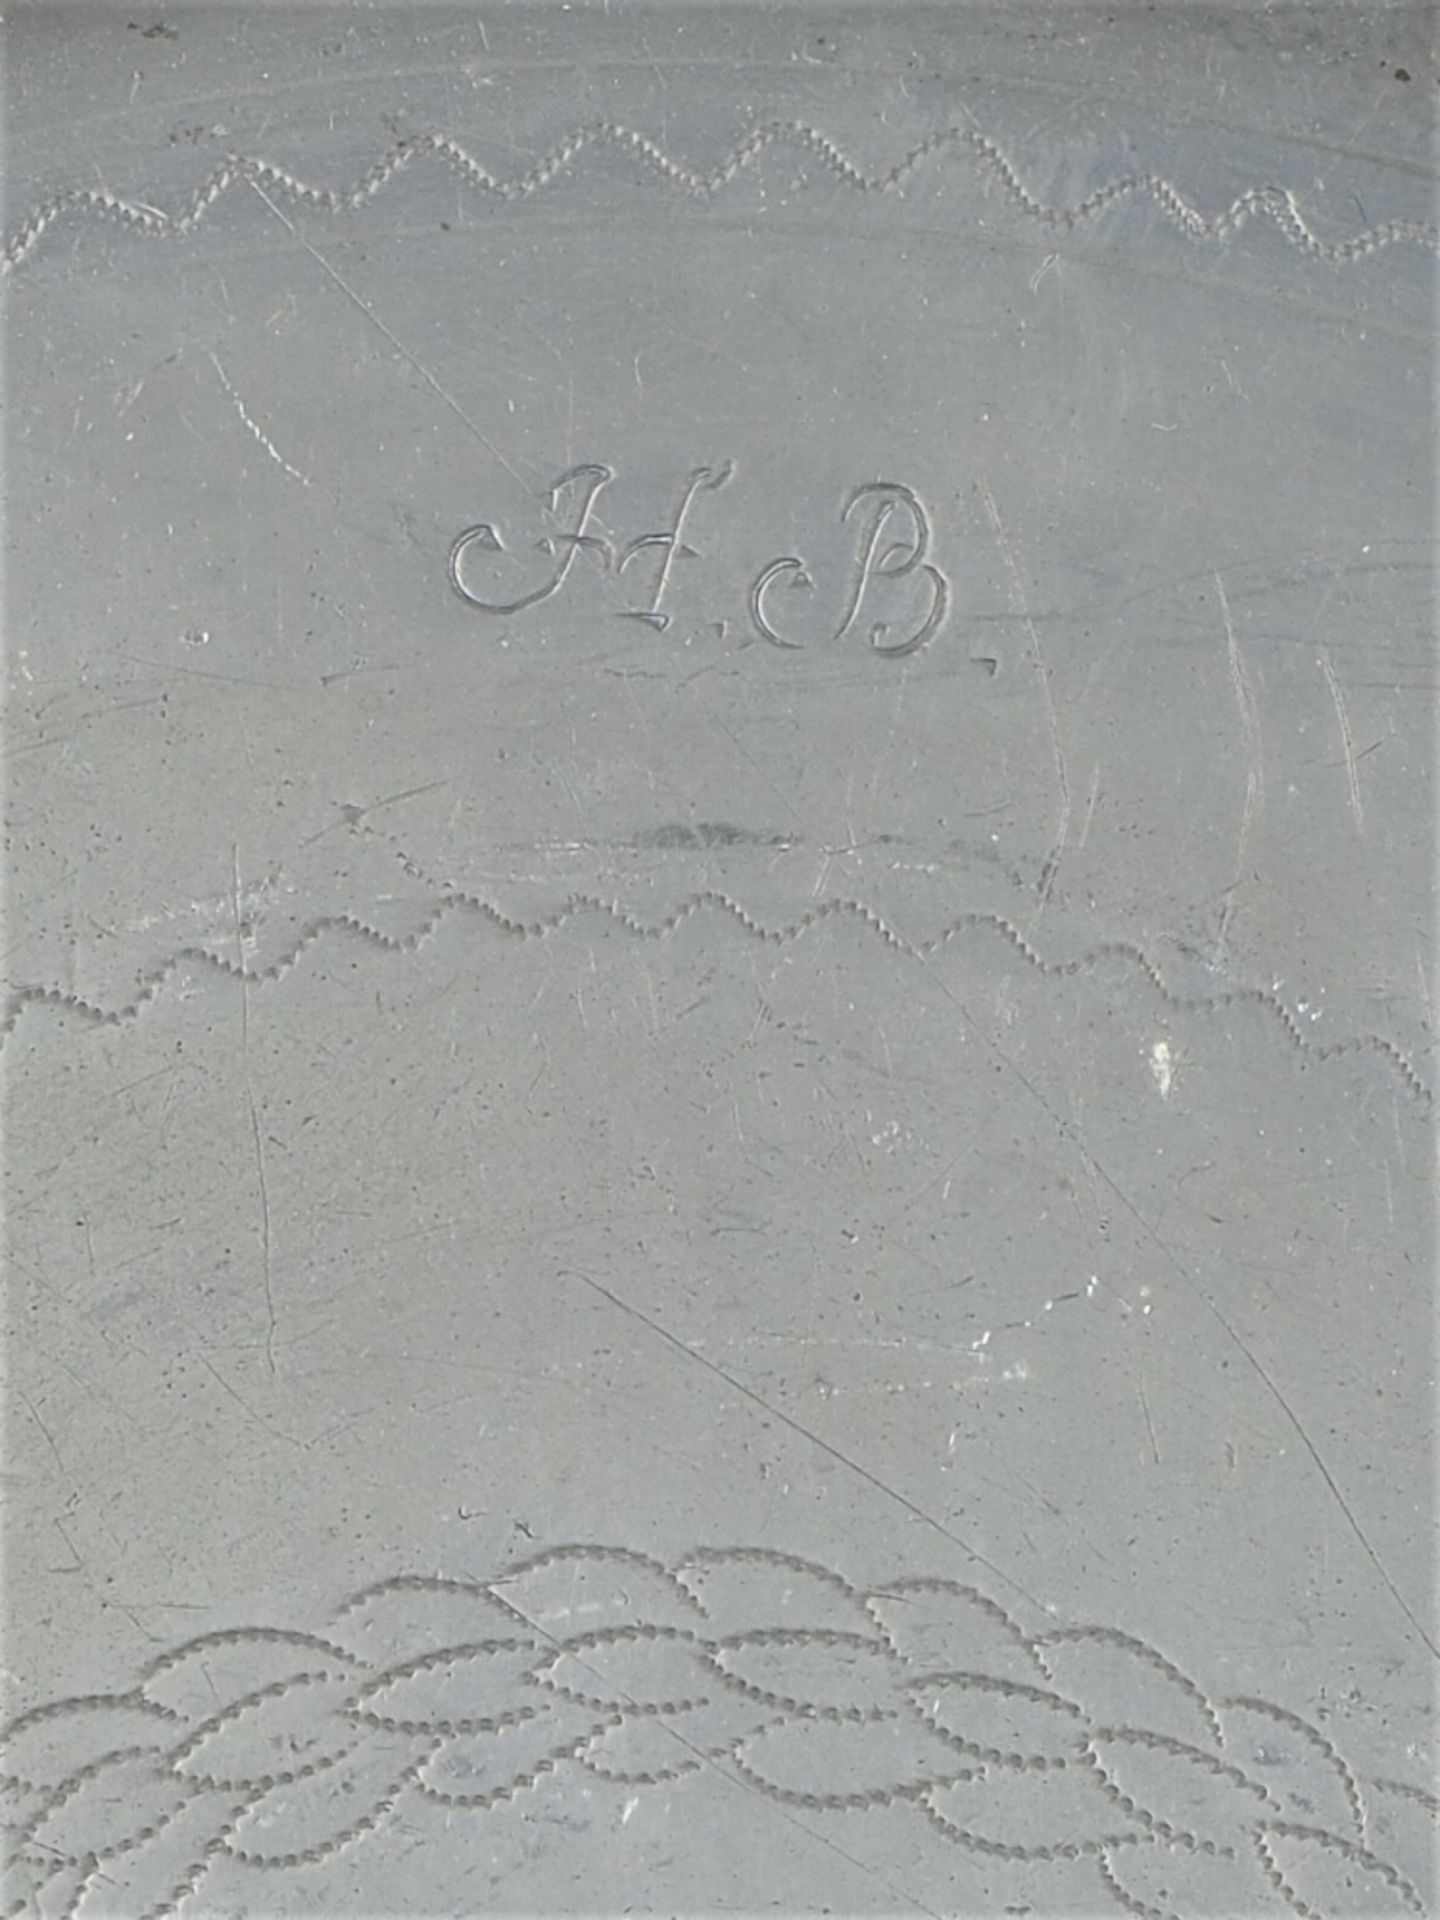 Pewter plate, 1788 - Image 2 of 4